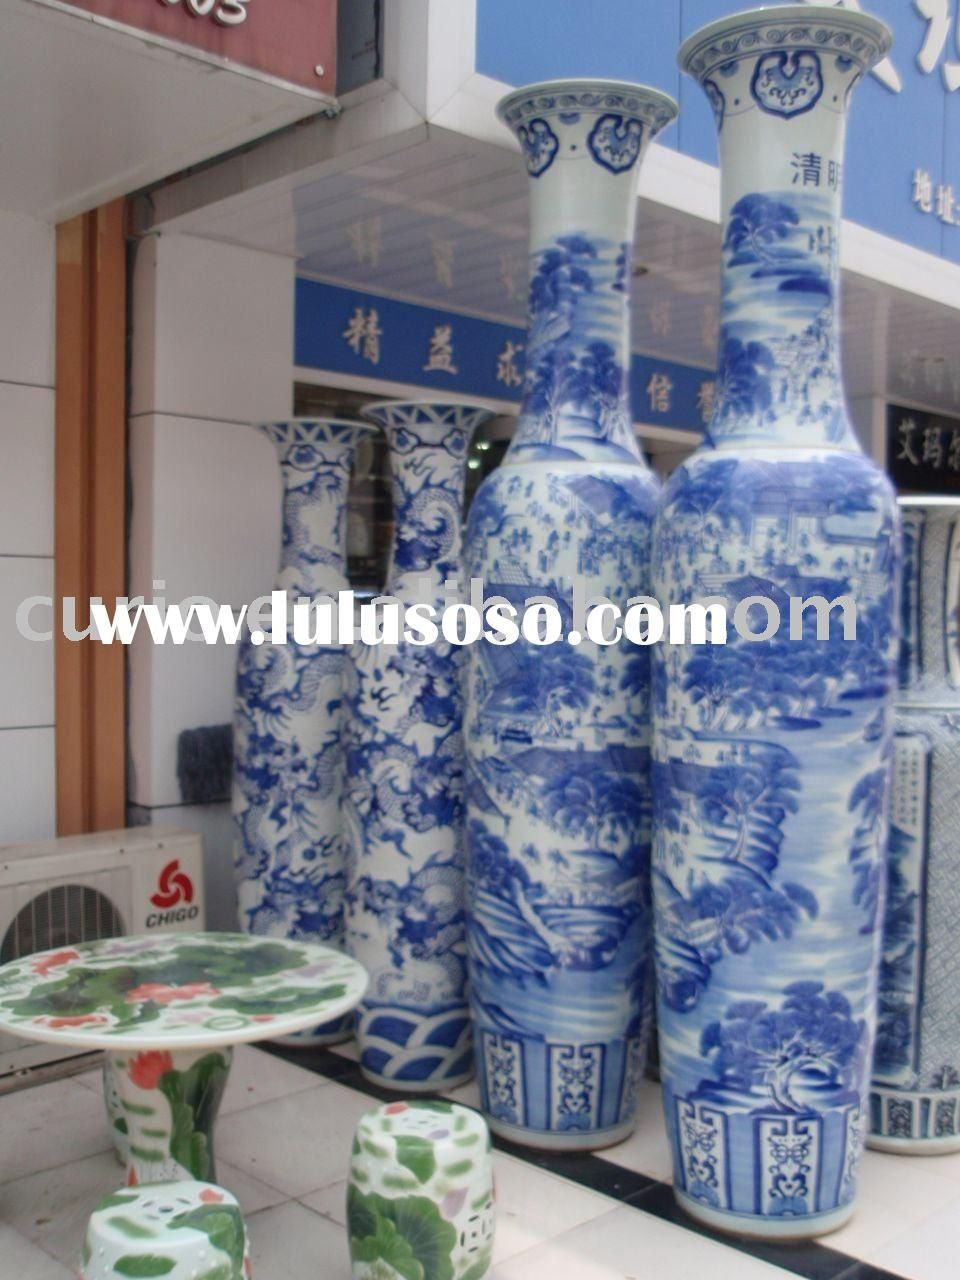 22 Lovable Old oriental Vases 2024 free download old oriental vases of chinese antique porcelain vase asian antiques pinterest with regard to chinese antique porcelain vase